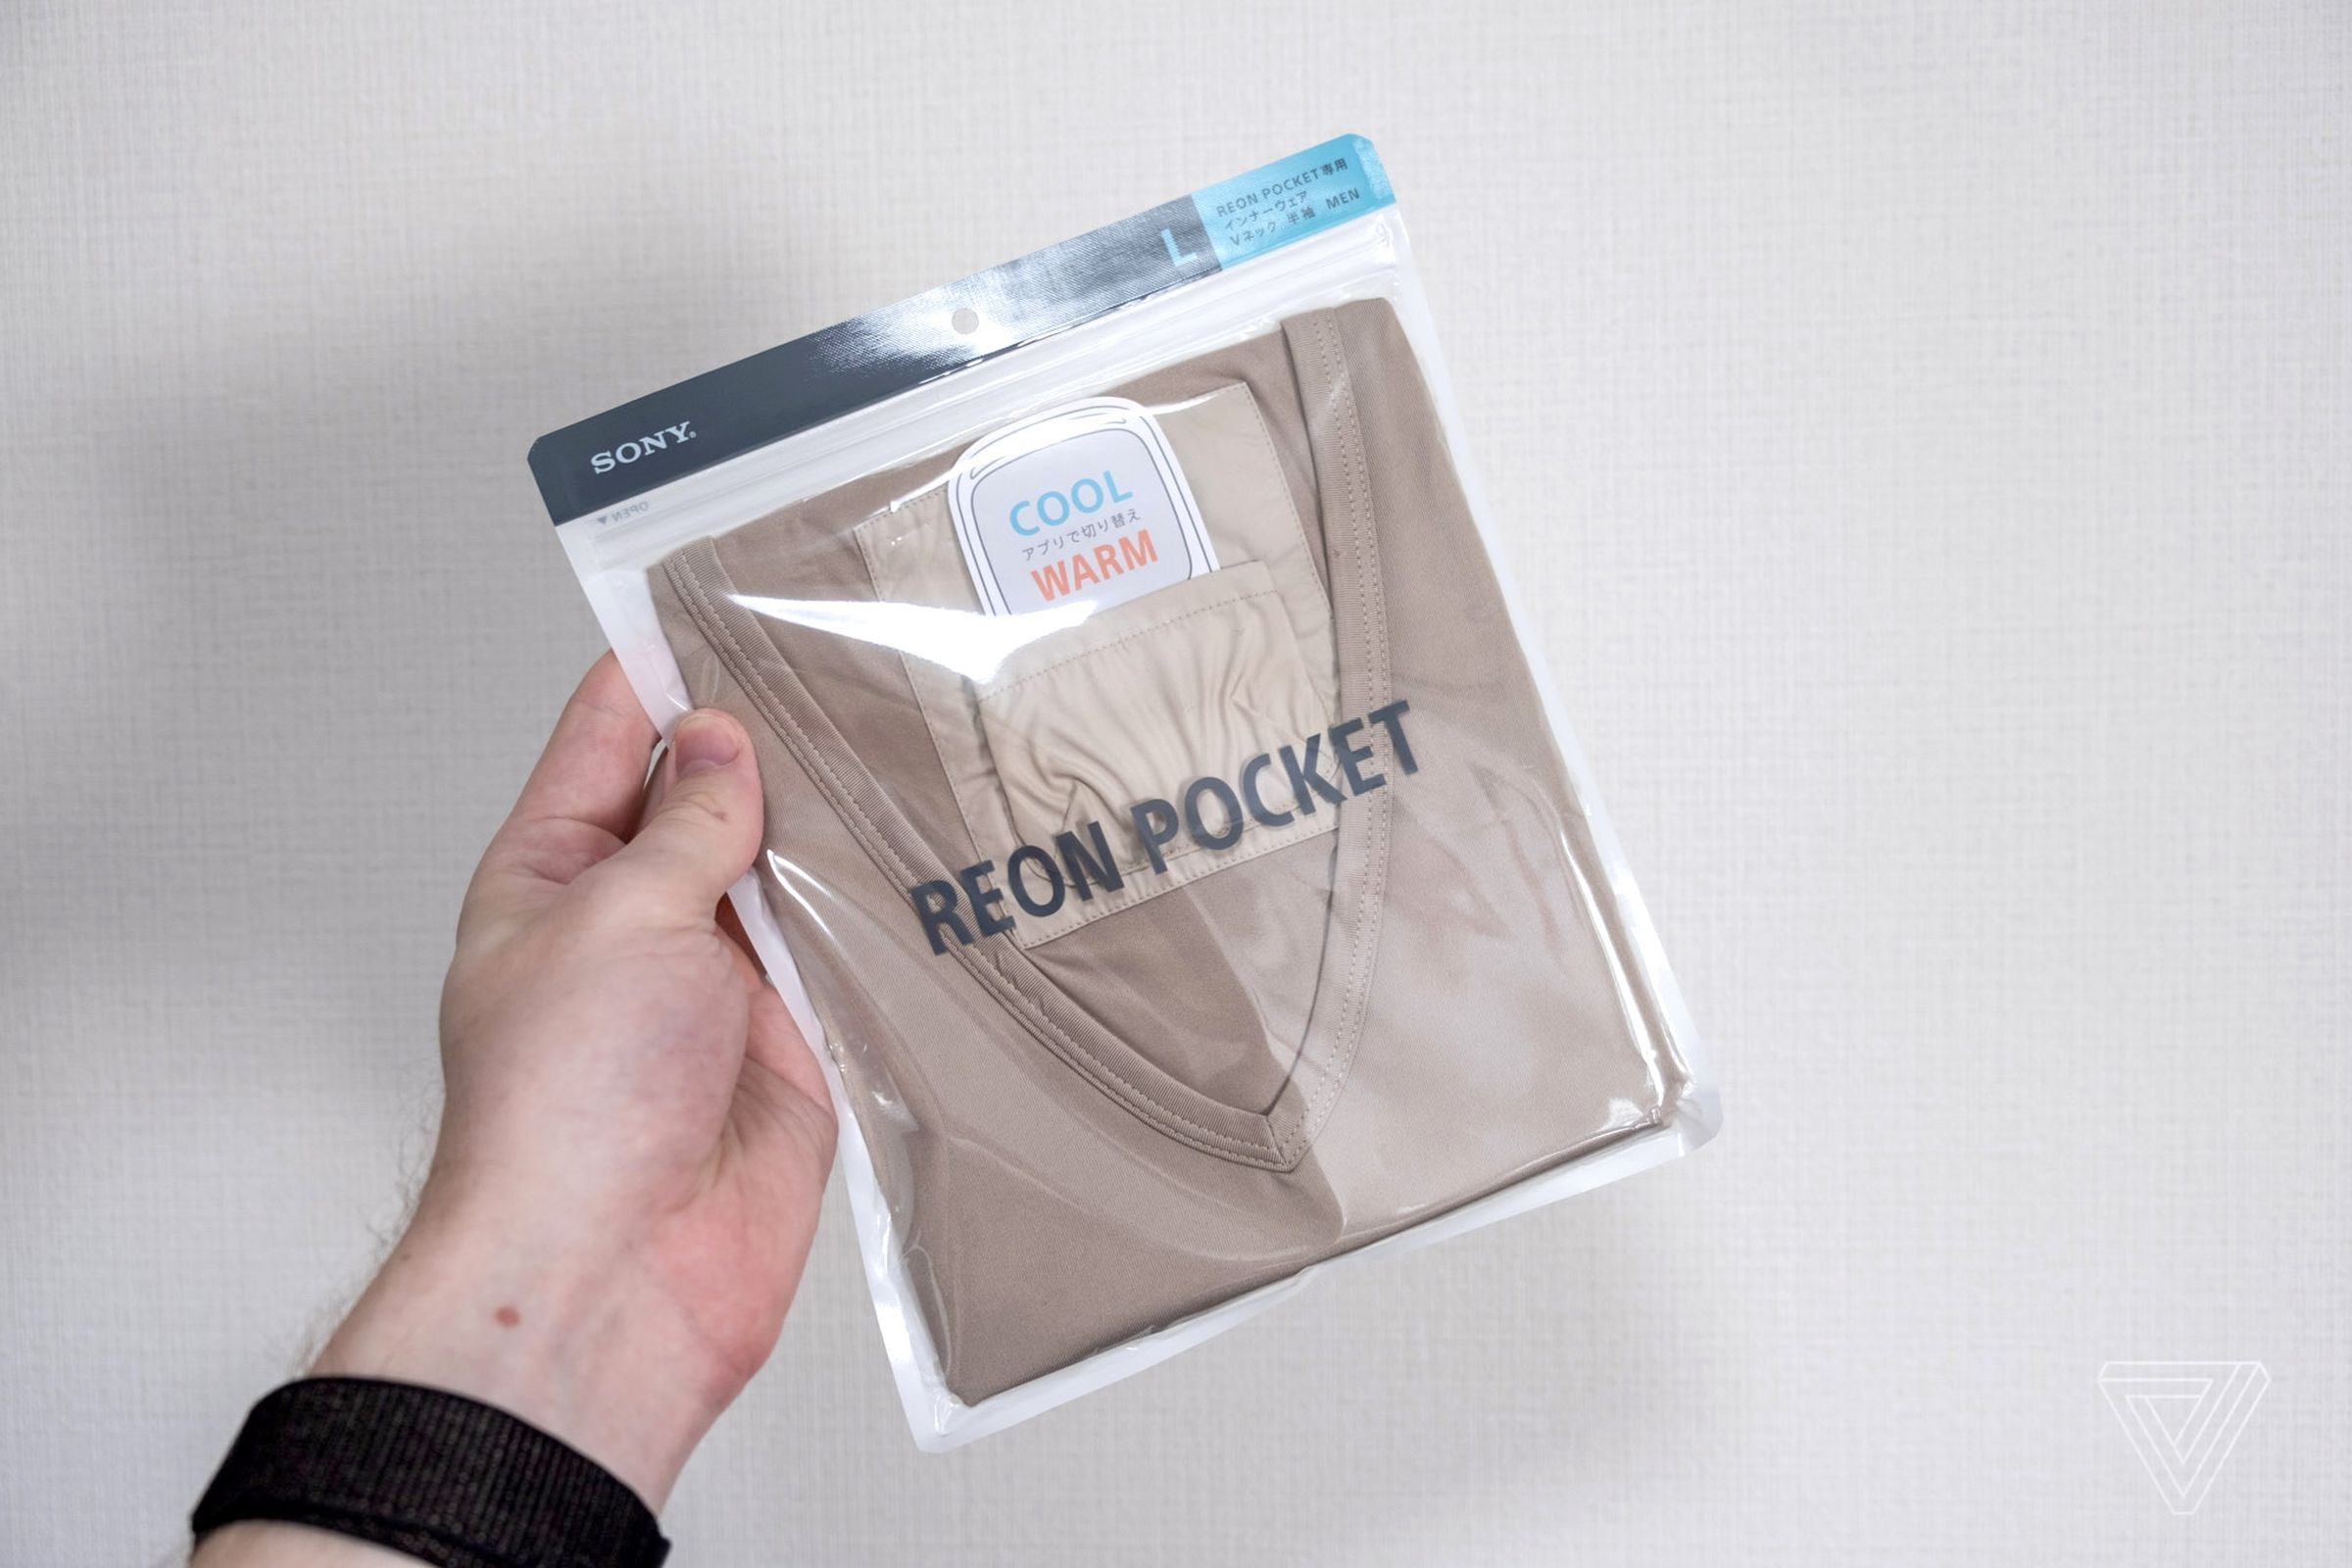 A Reon Pocket undershirt, complete with inner pocket on the back.